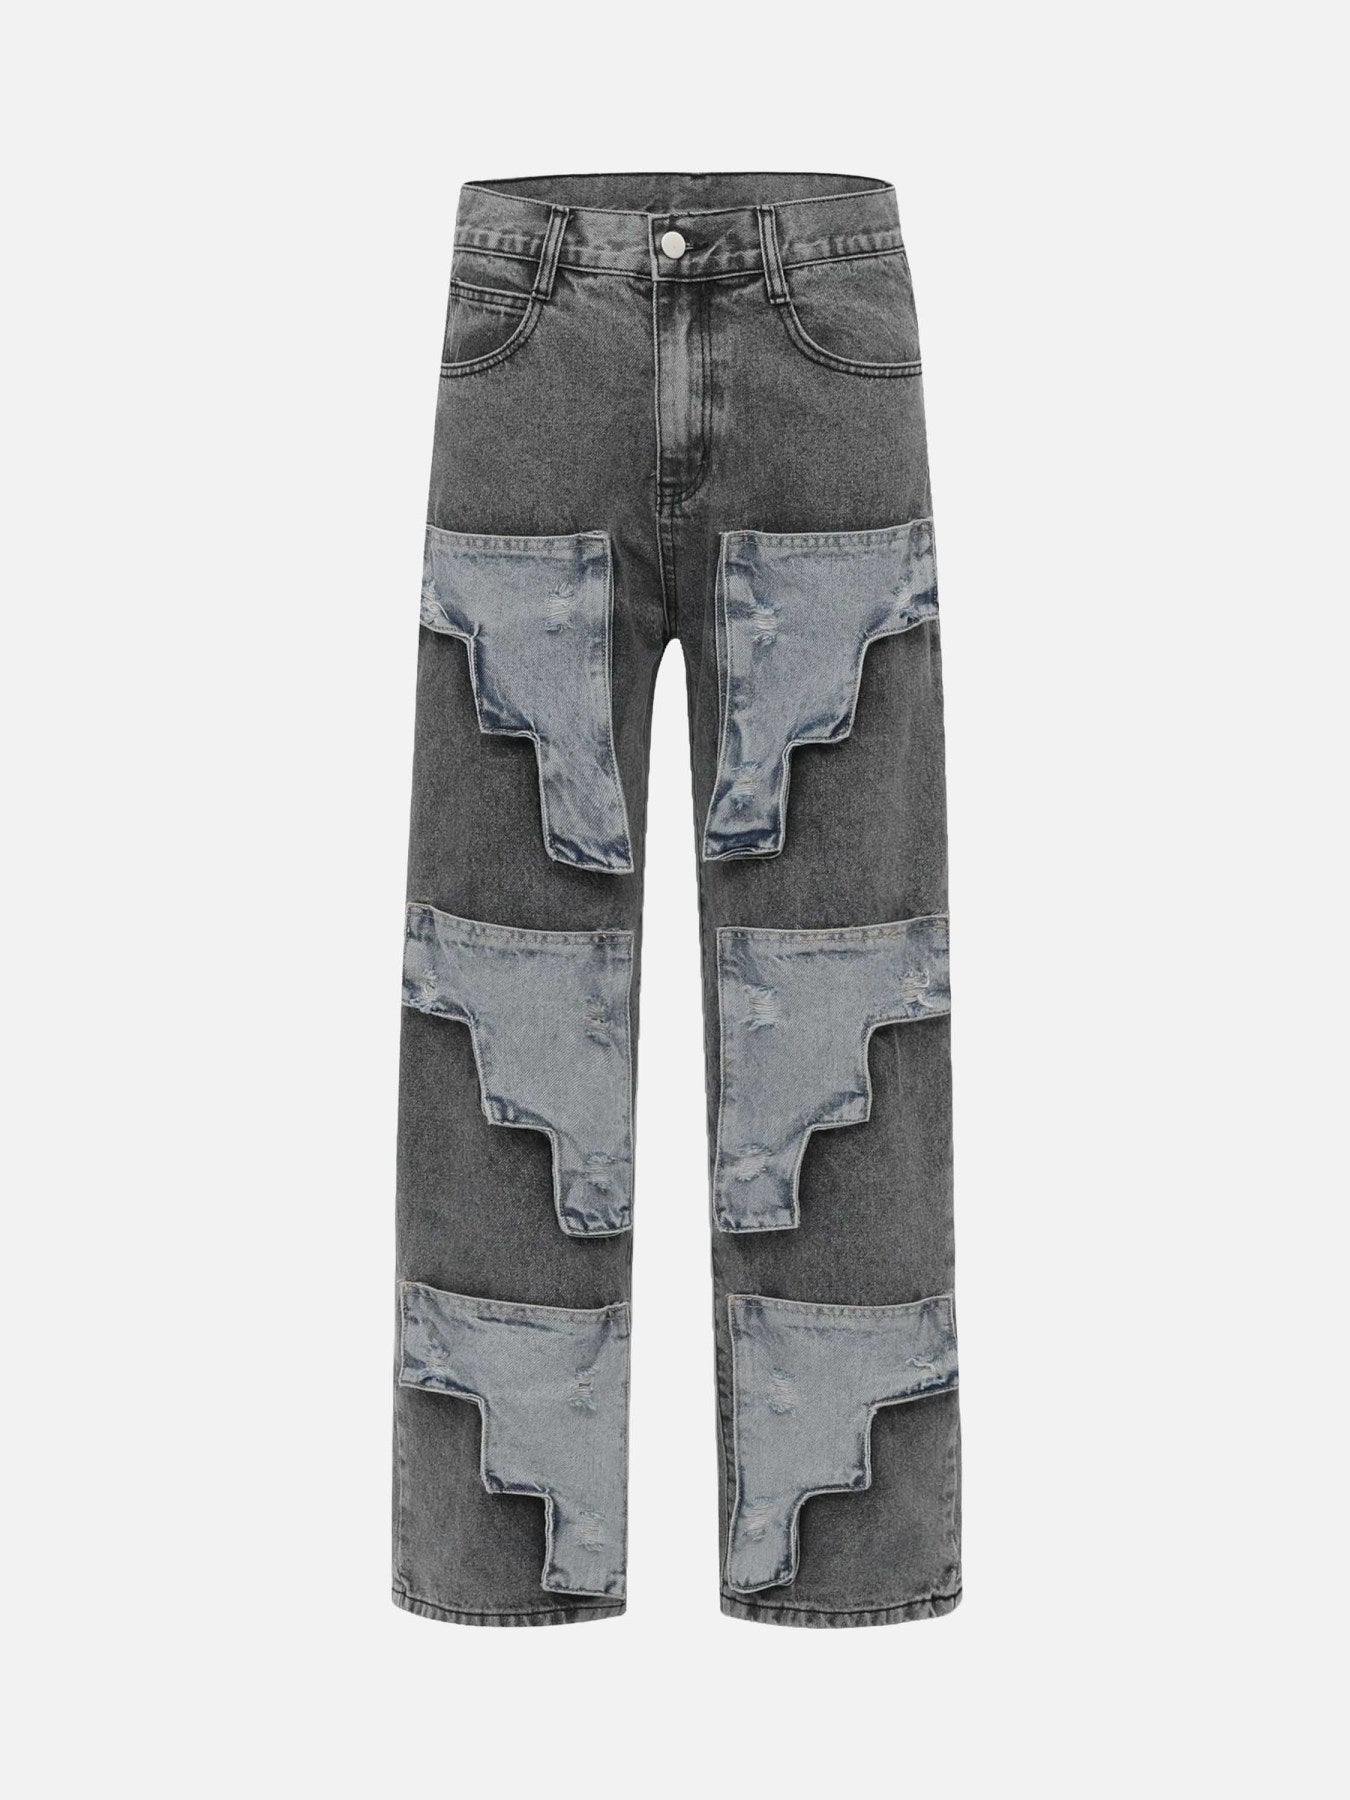 The Supermade Washed And Patched Ripped Jeans